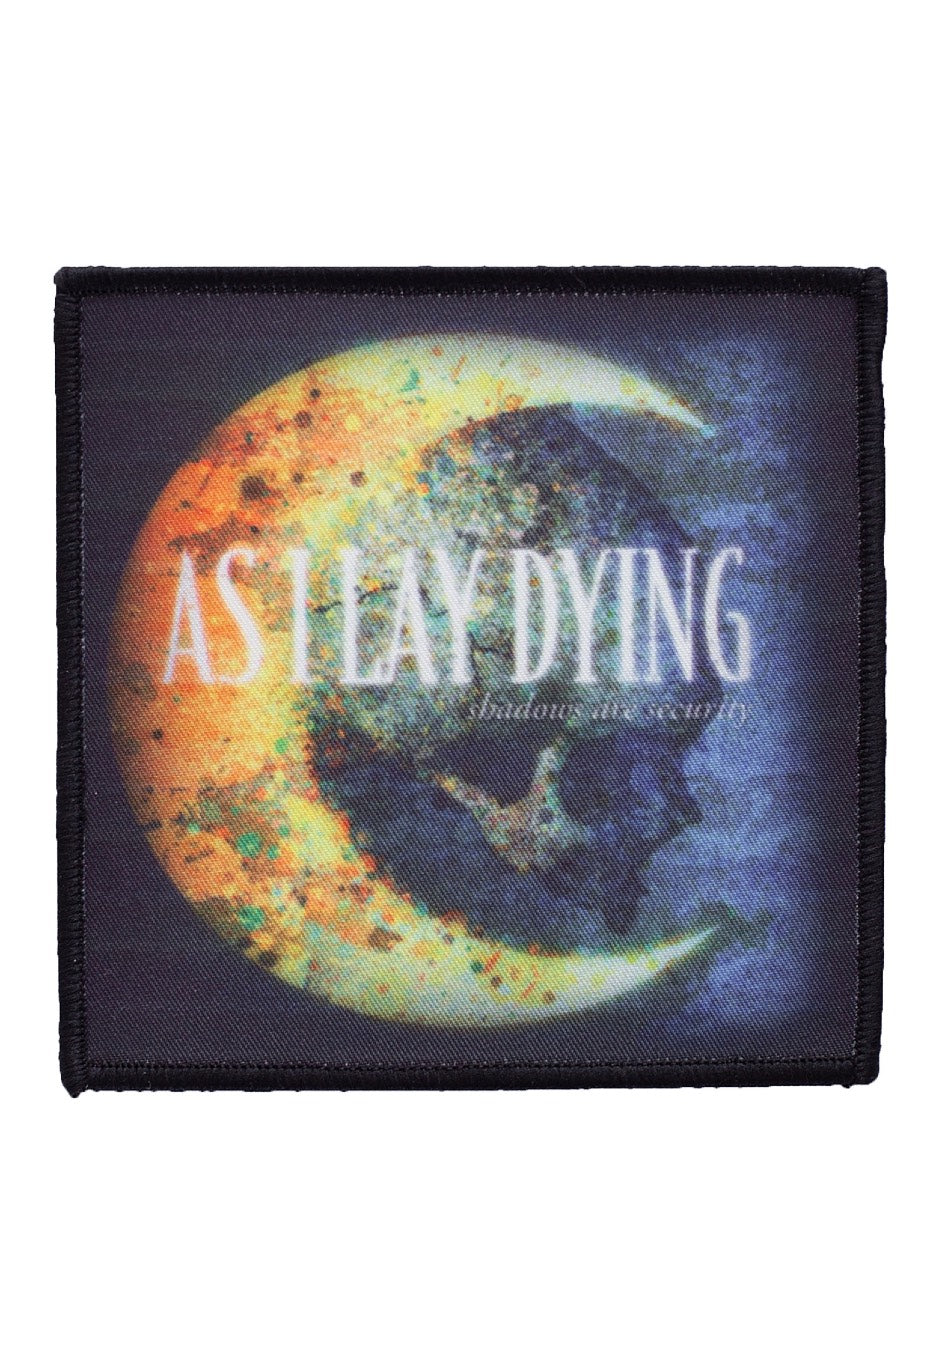 As I Lay Dying - Shadows Are Security - Patch